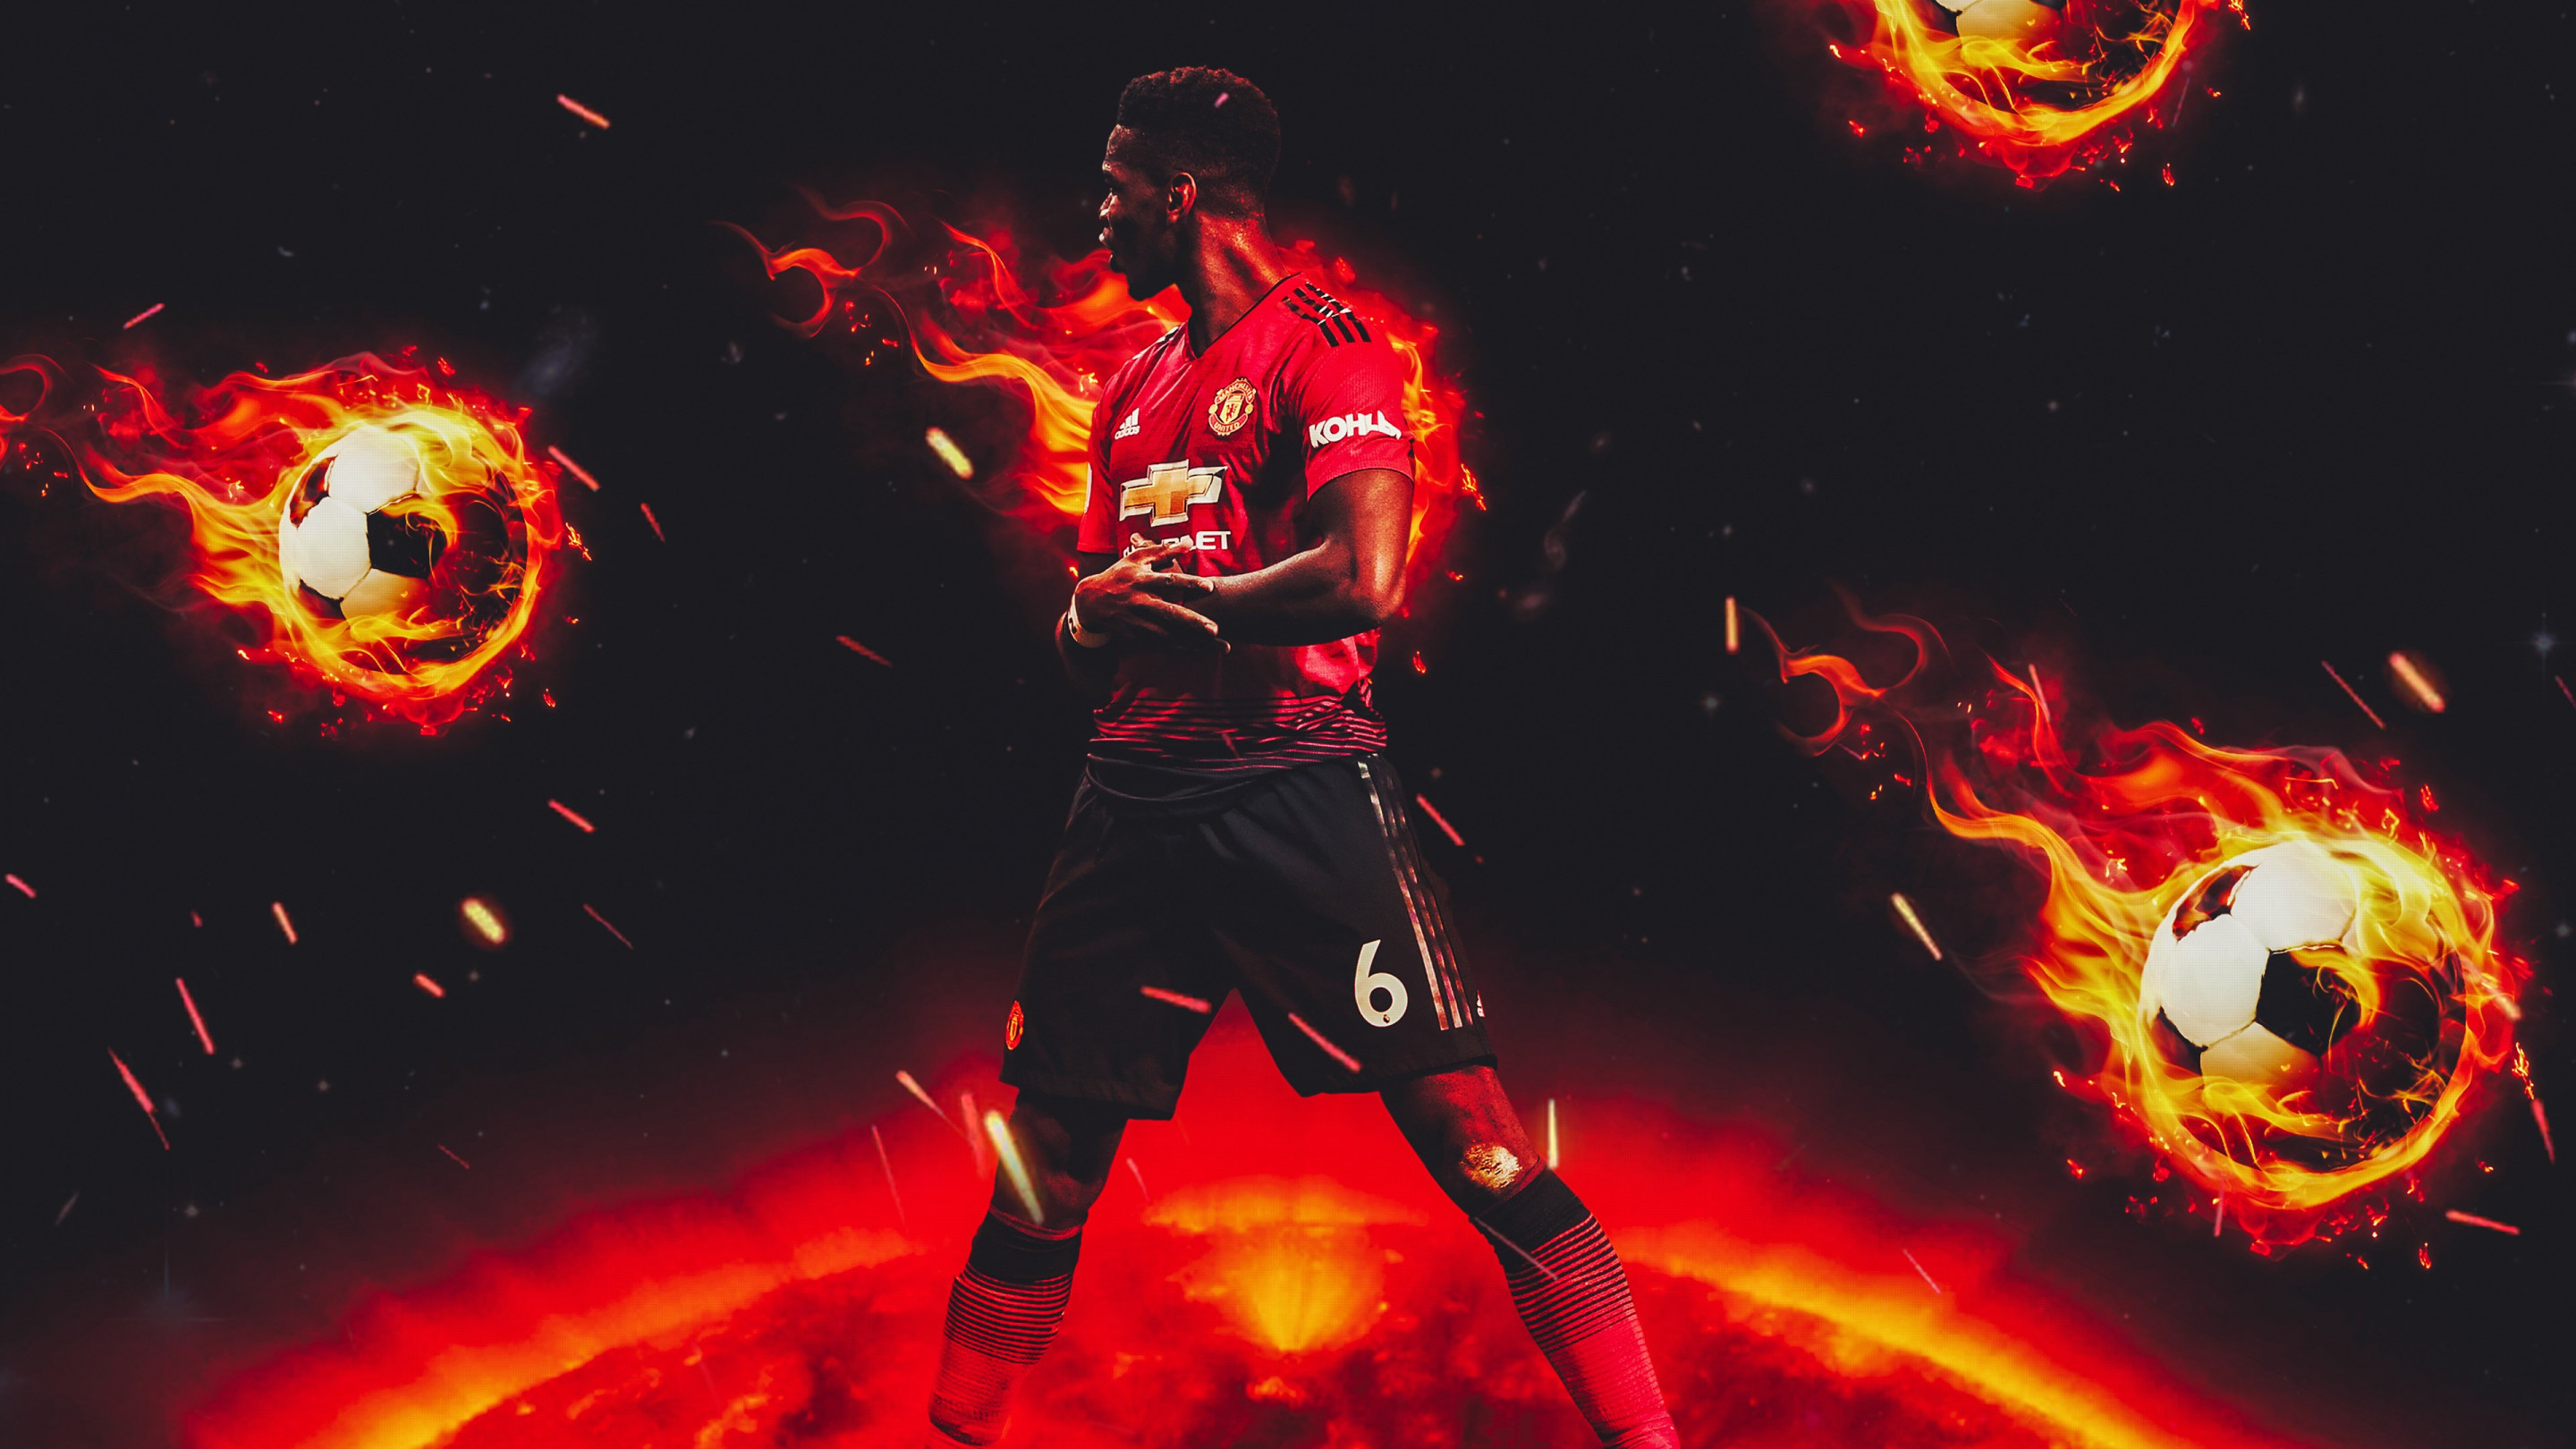 Paul Pogba for Manchester United wallpaper 2880x1620